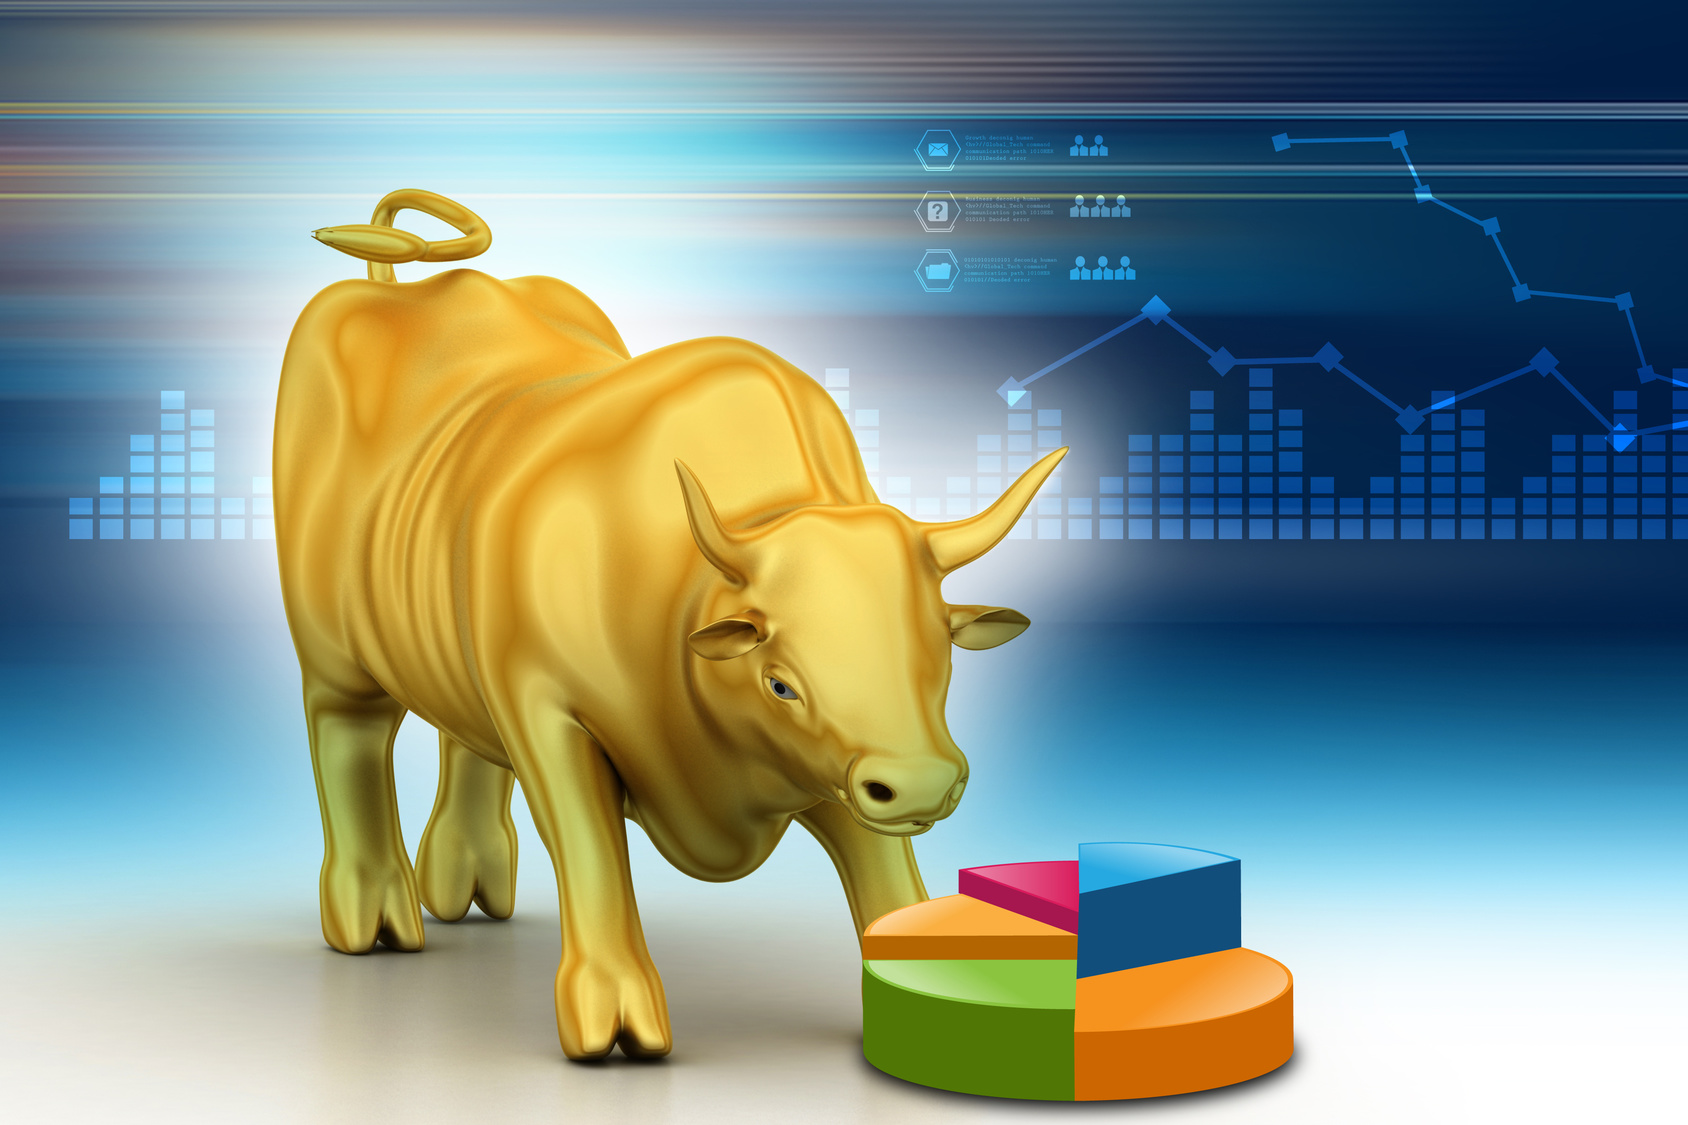 Gold – The bull market continues